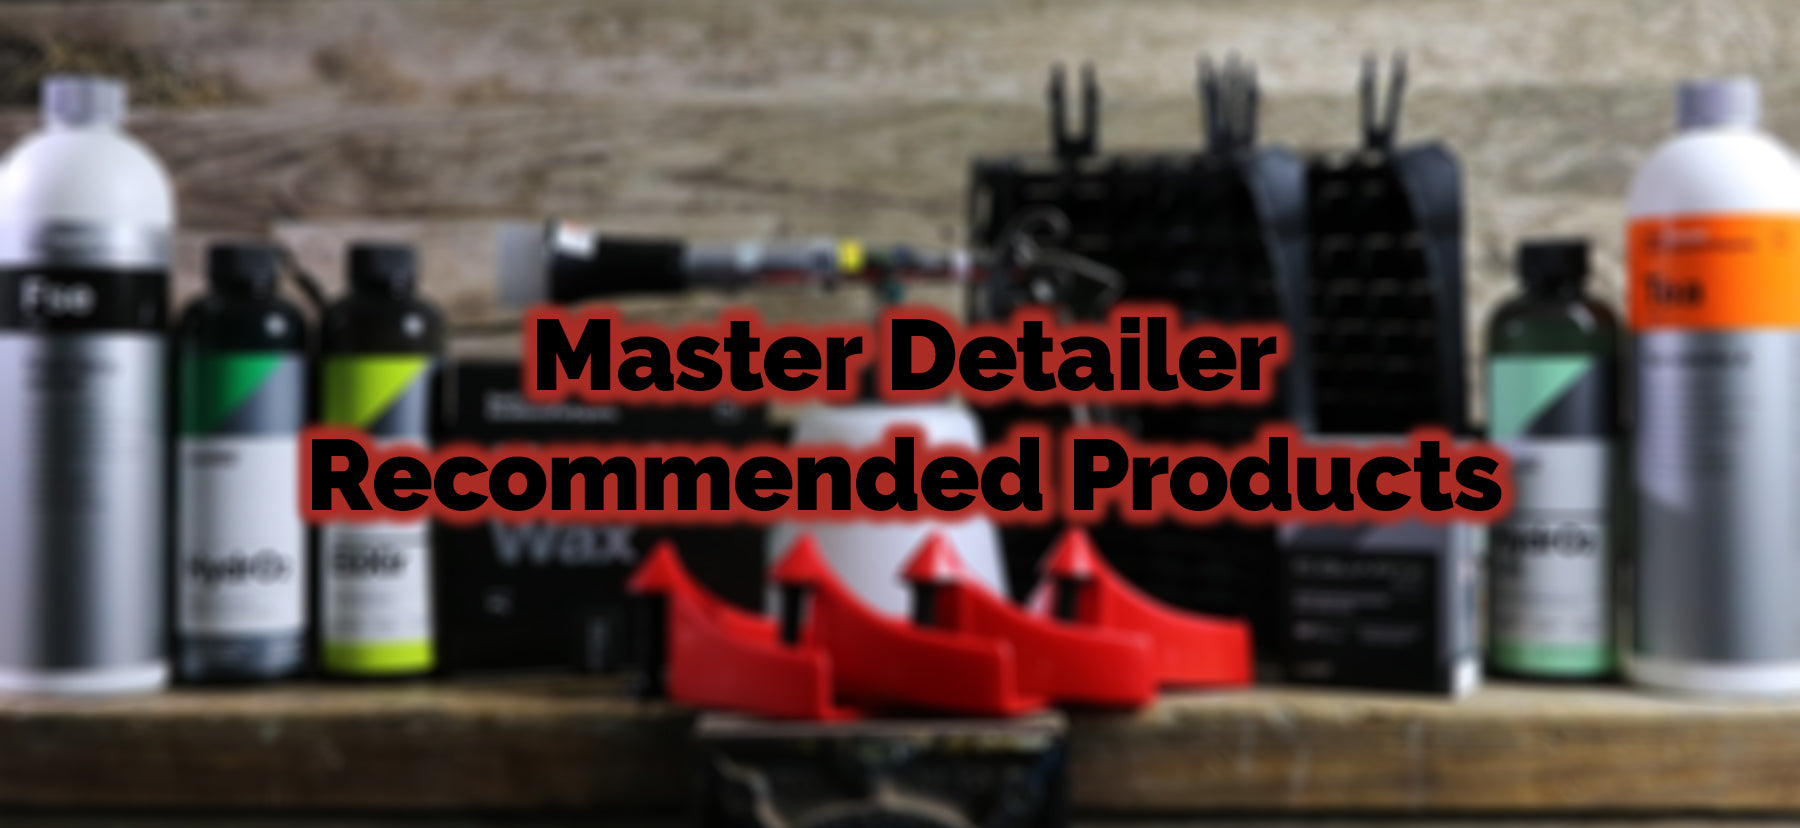 Master Detailer Recommended Products